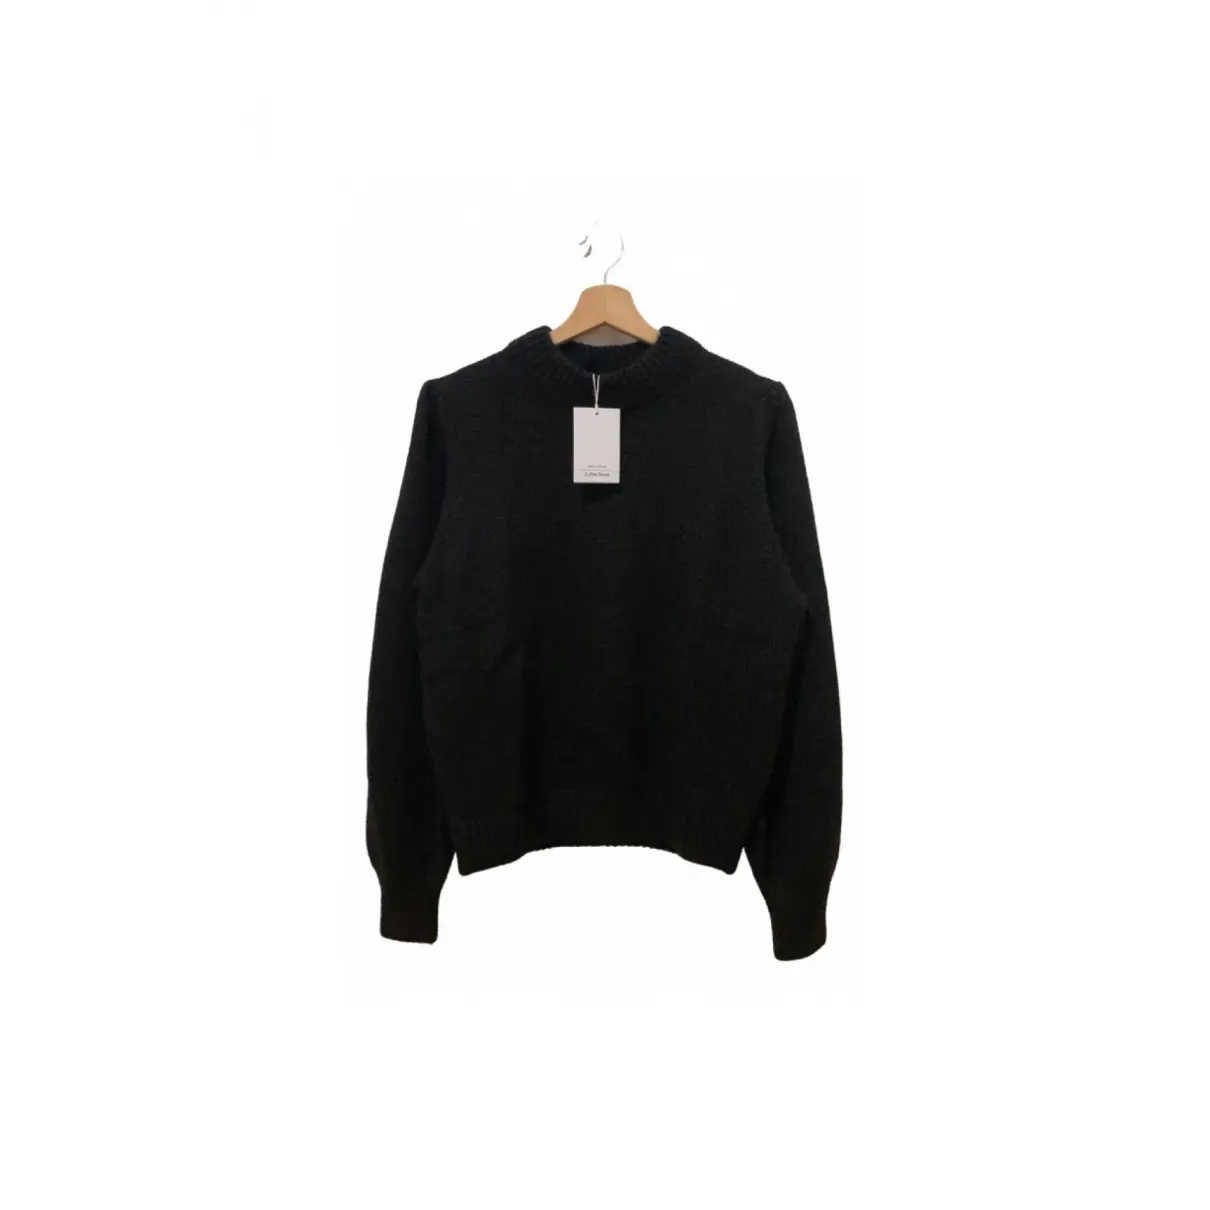 Buy & Other Stories Wool cardigan online